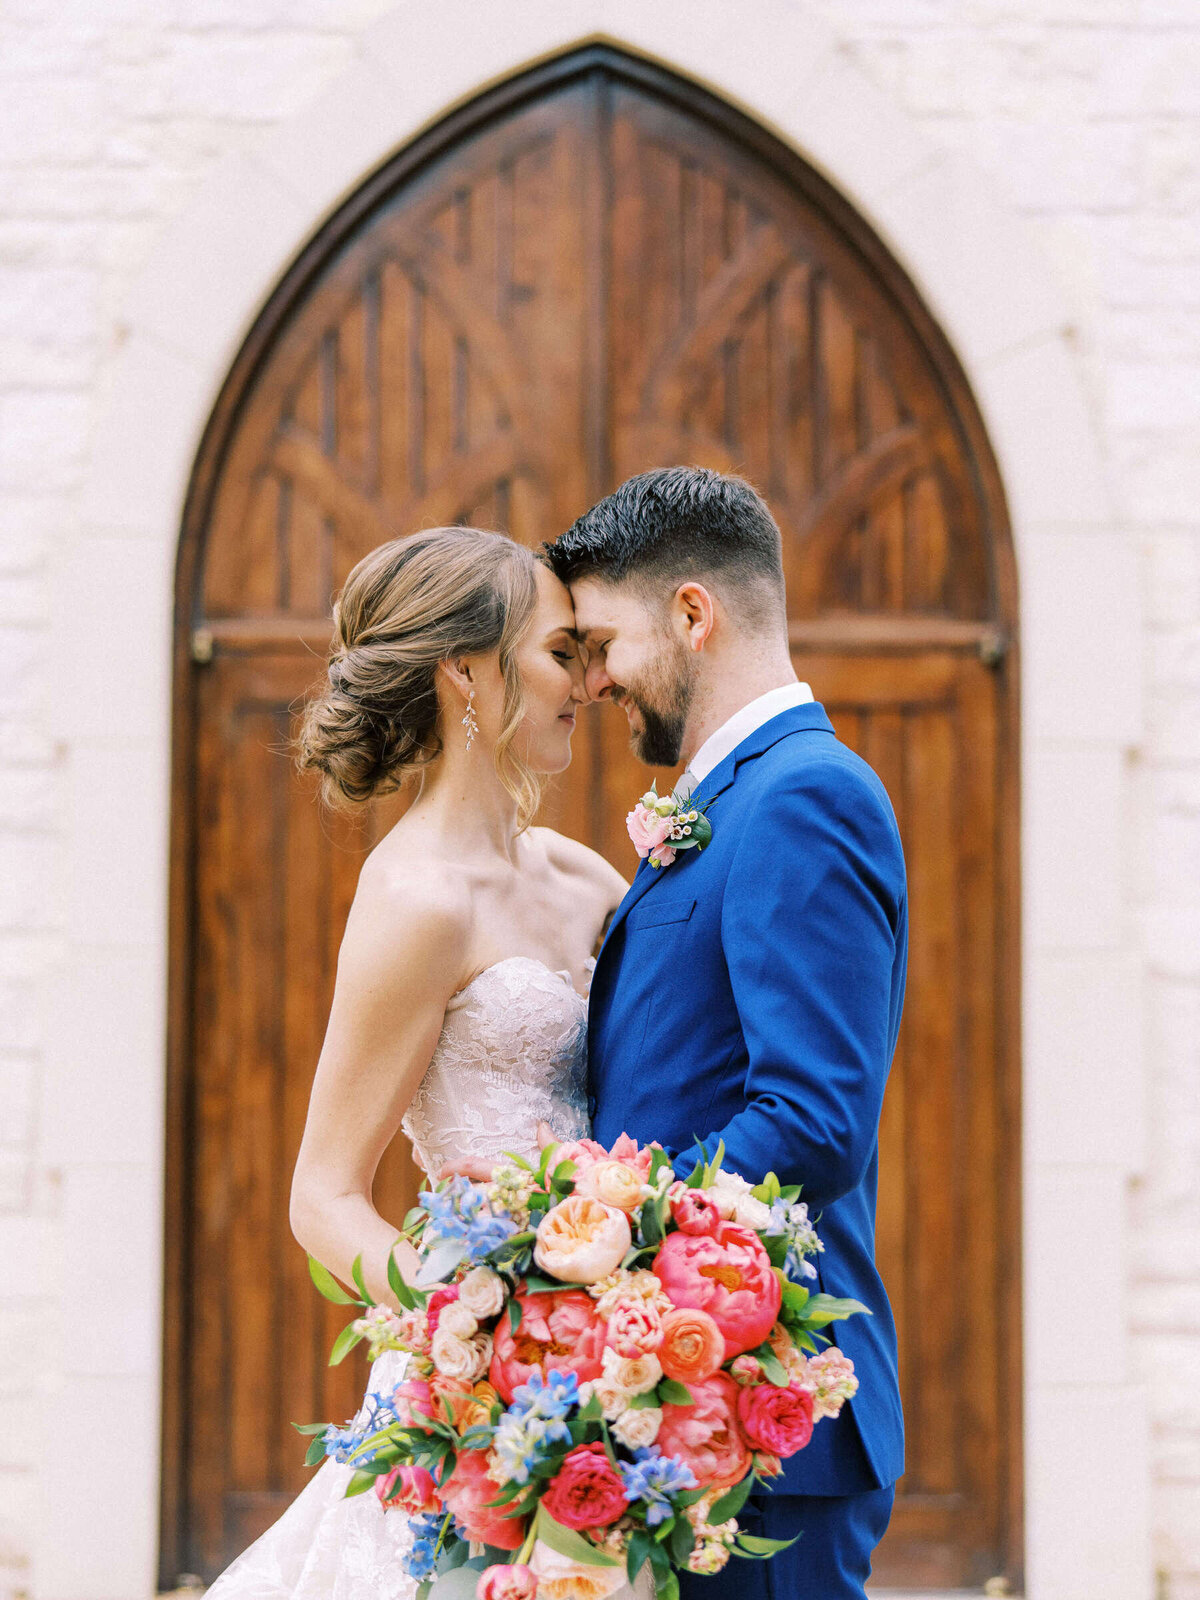 Bride and groom at Ashton Gardens wedding chapel with colorful bouquet